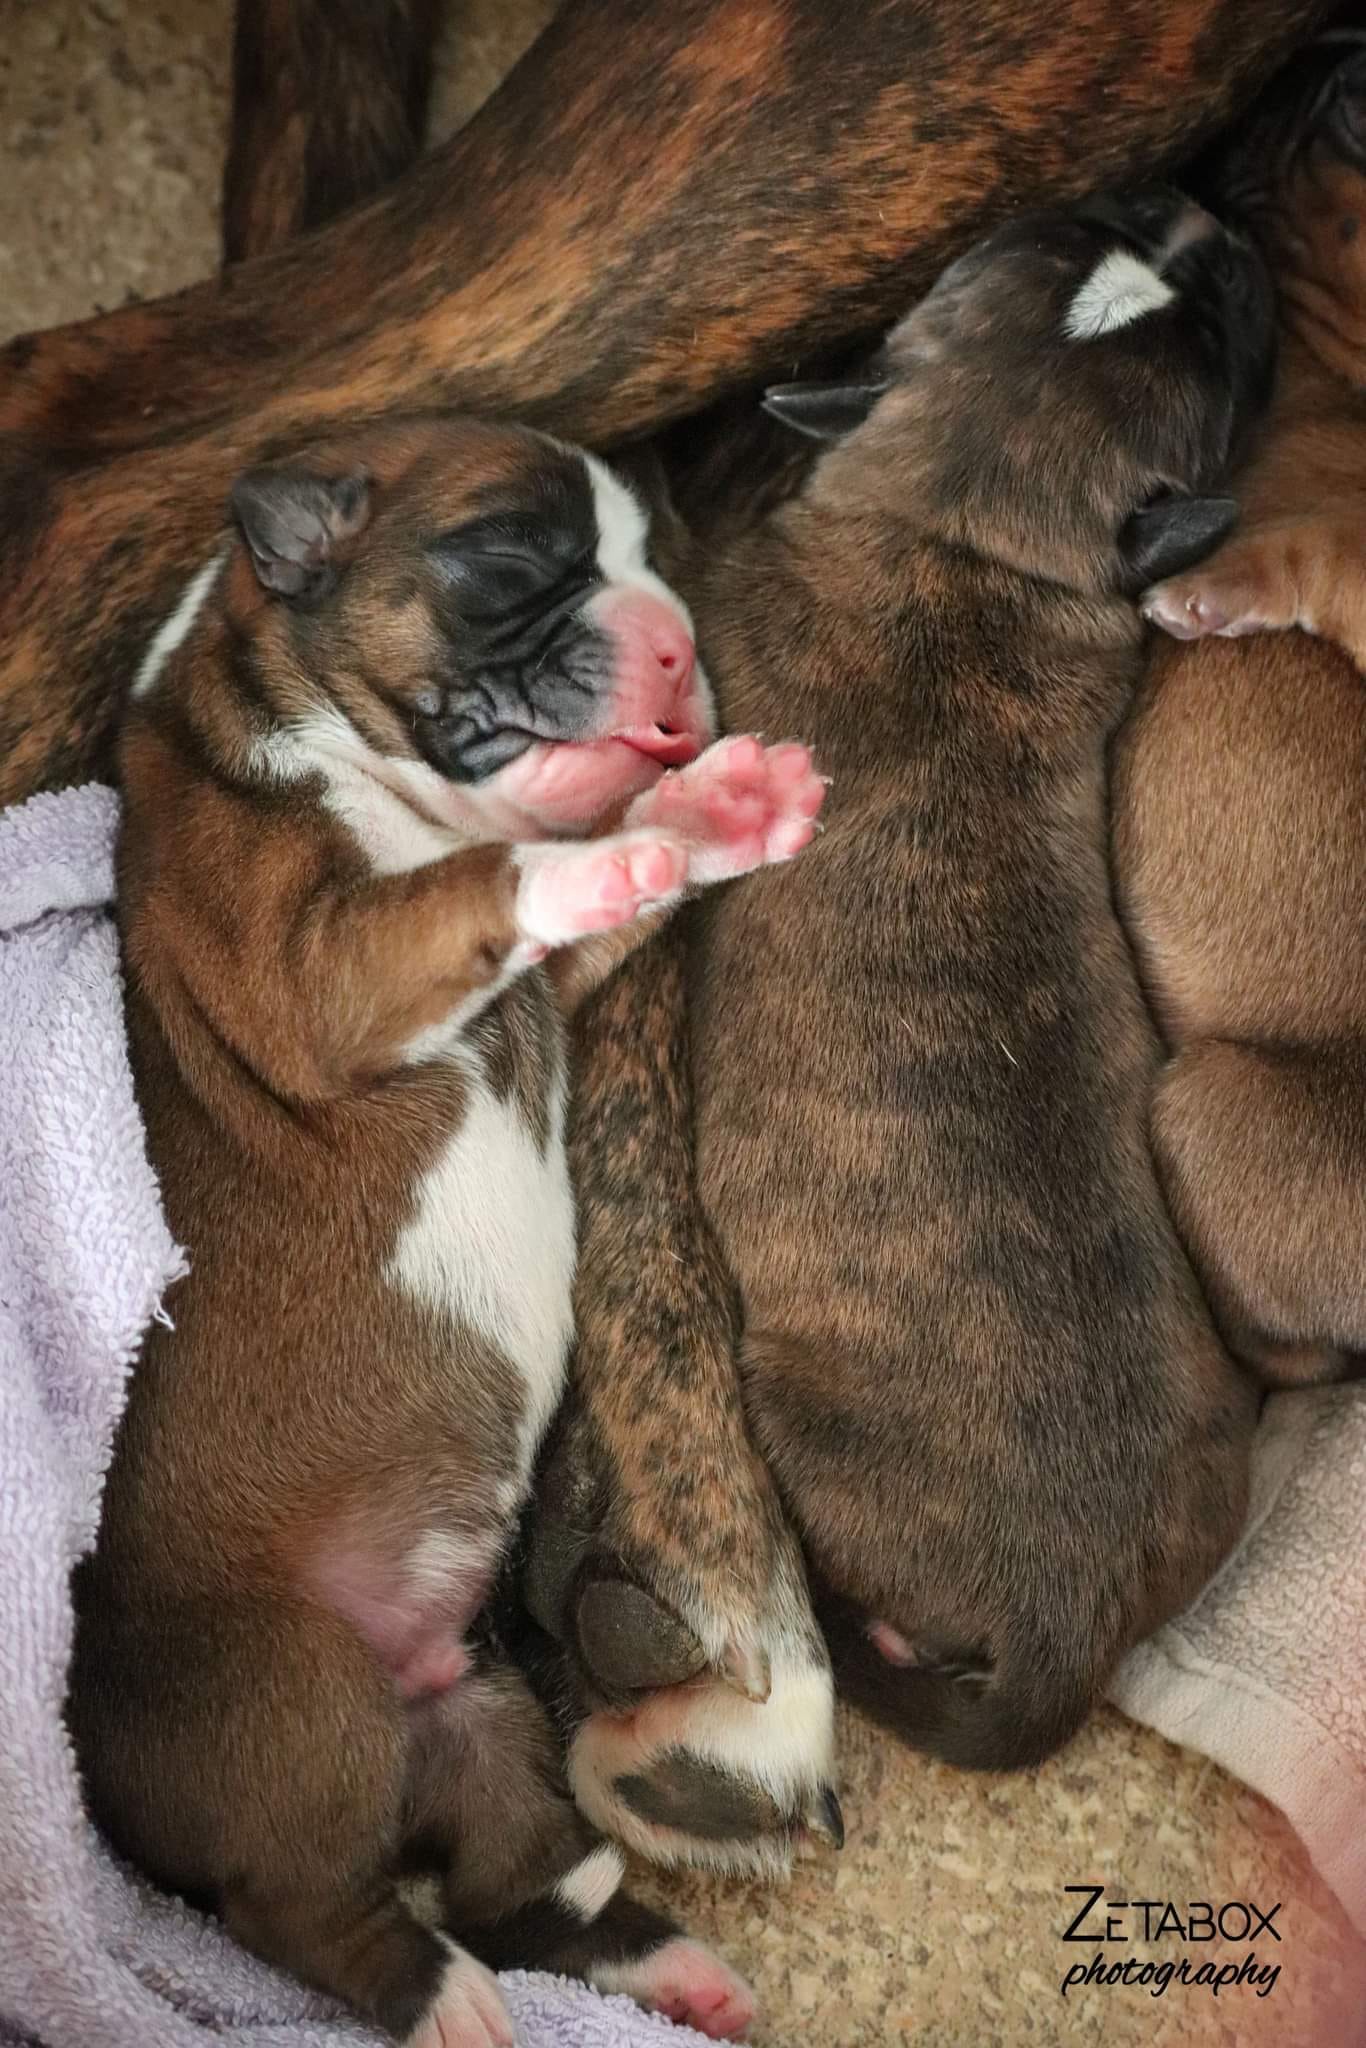 Two boxer dogs puppies sleep next to their mother's leg